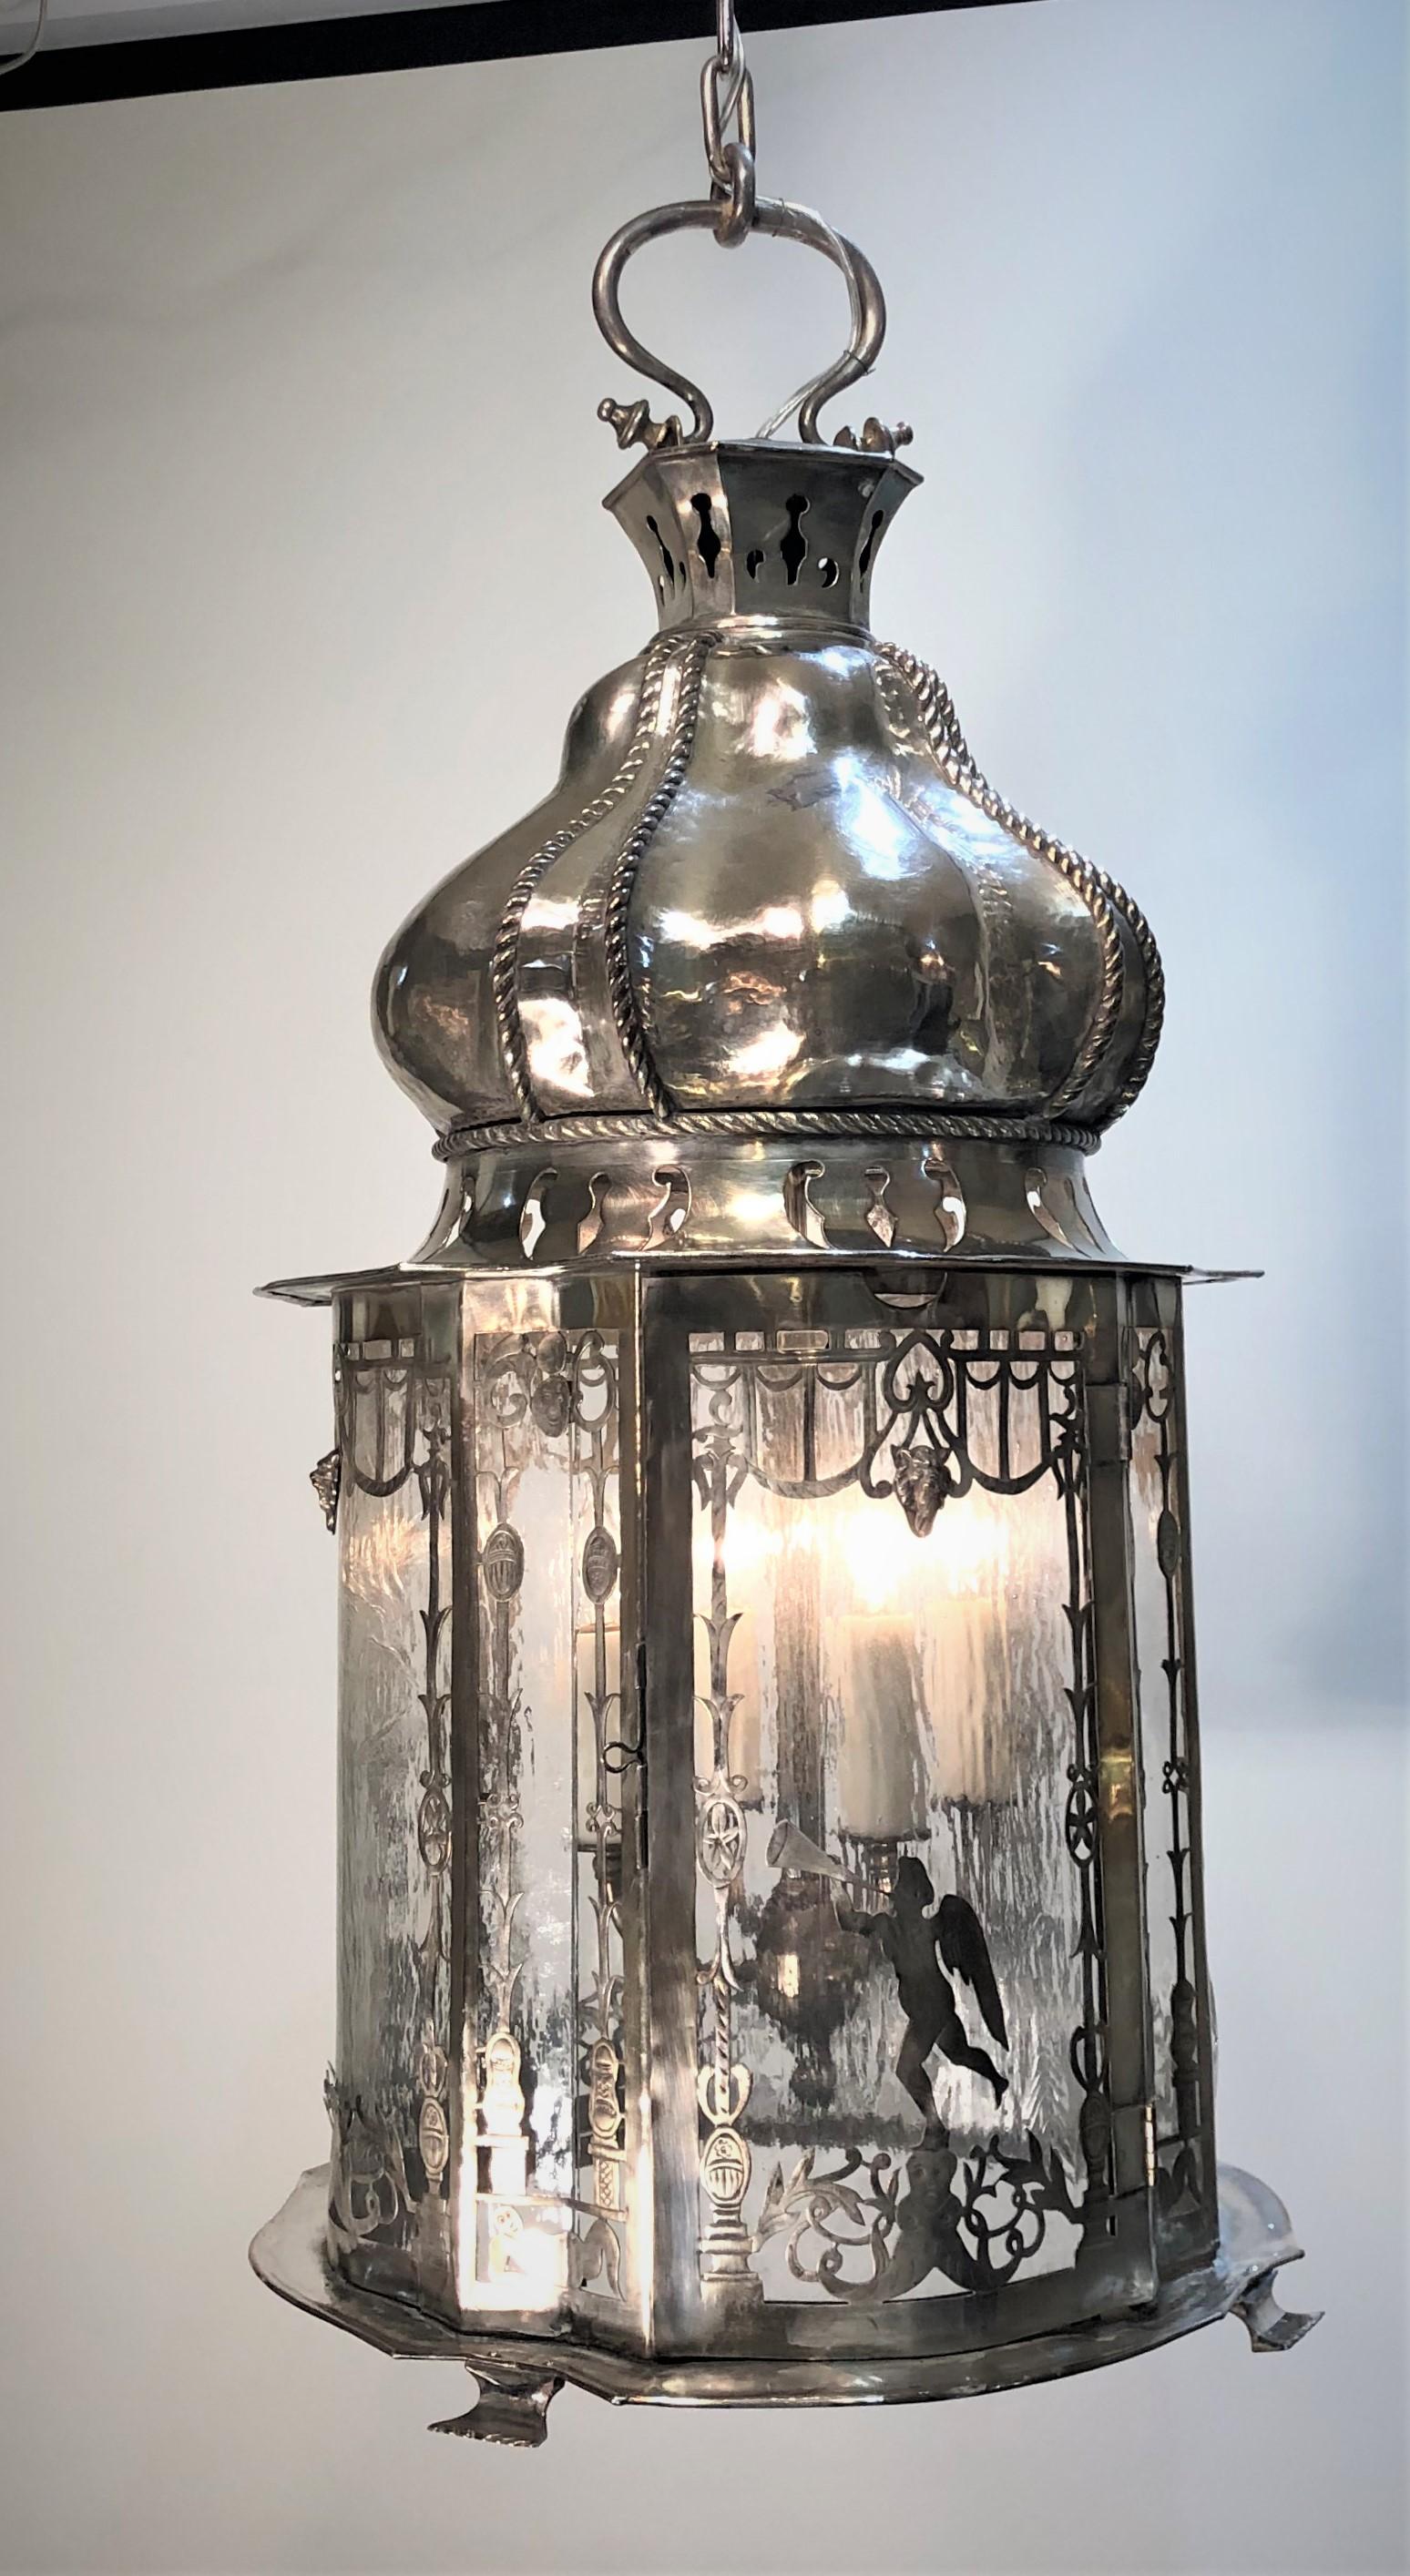 The Caldwell Lantern is silver-plated in an orientalist form of a tassel. This Whimsical Lantern is fashioned to resemble a hand tied corded knot coming down into a tassel. The tassel form body concave and convex with venetian glass panes framed